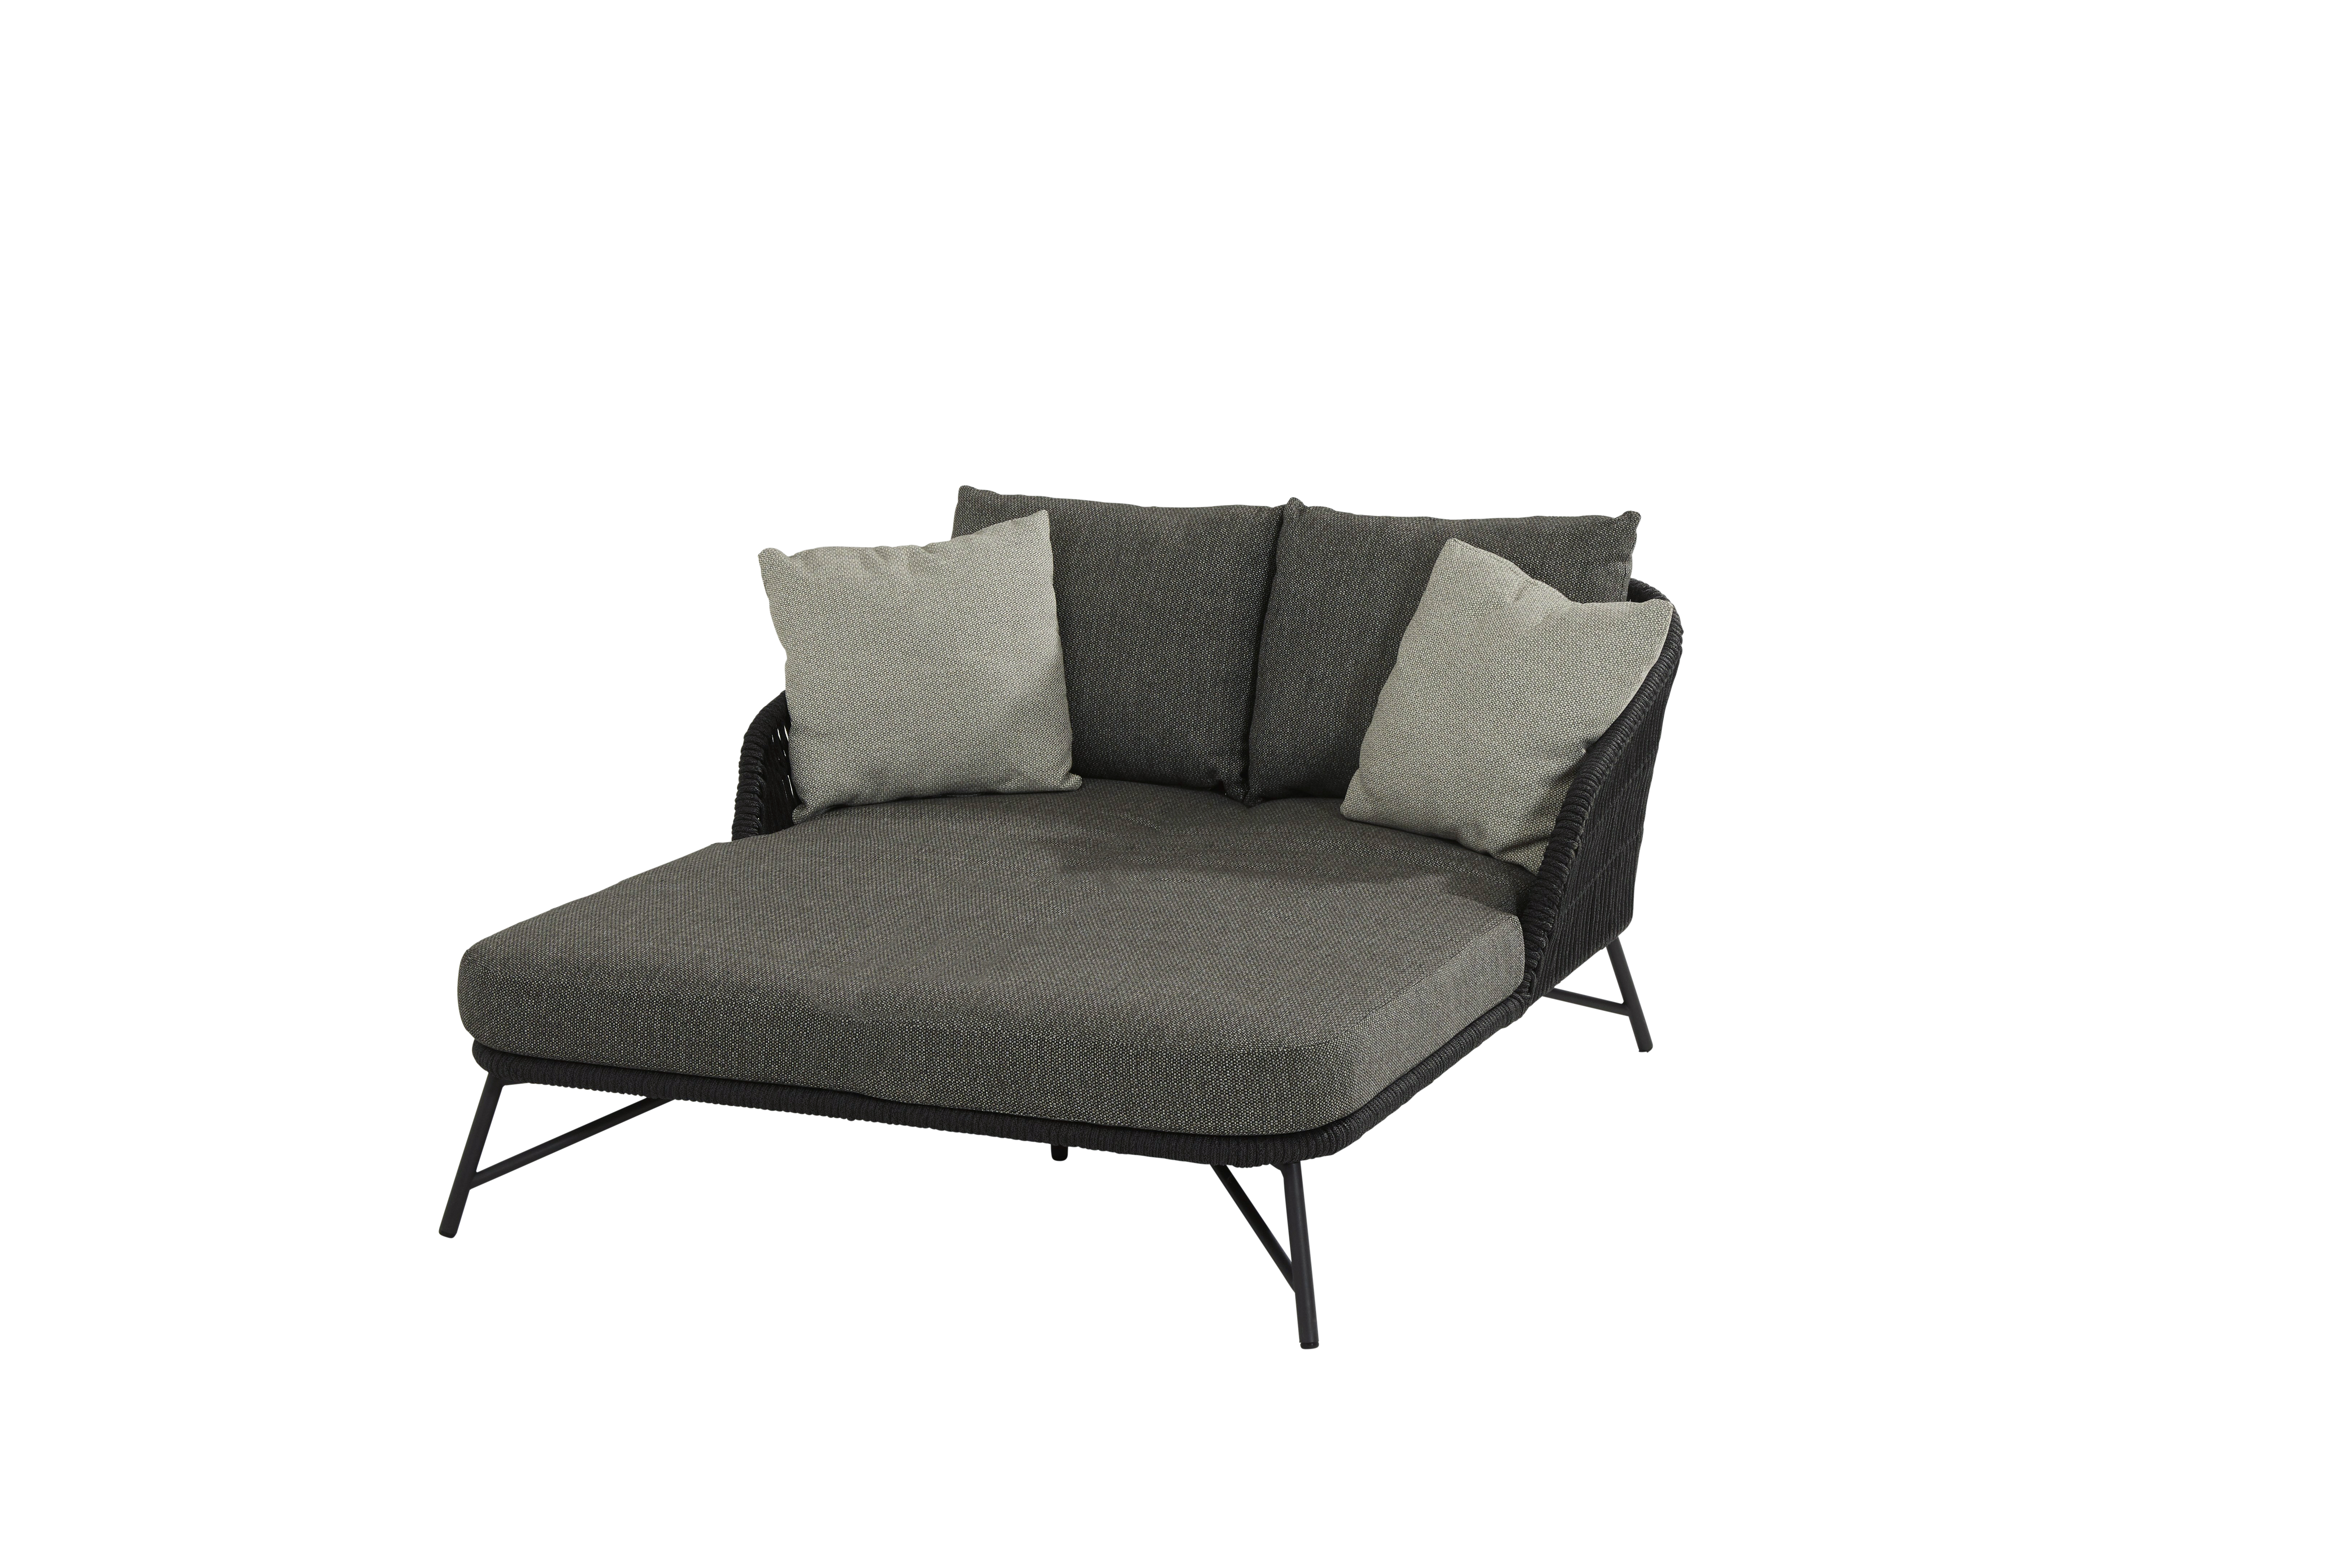 Marbella daybed 2 seater with 6 cushions 